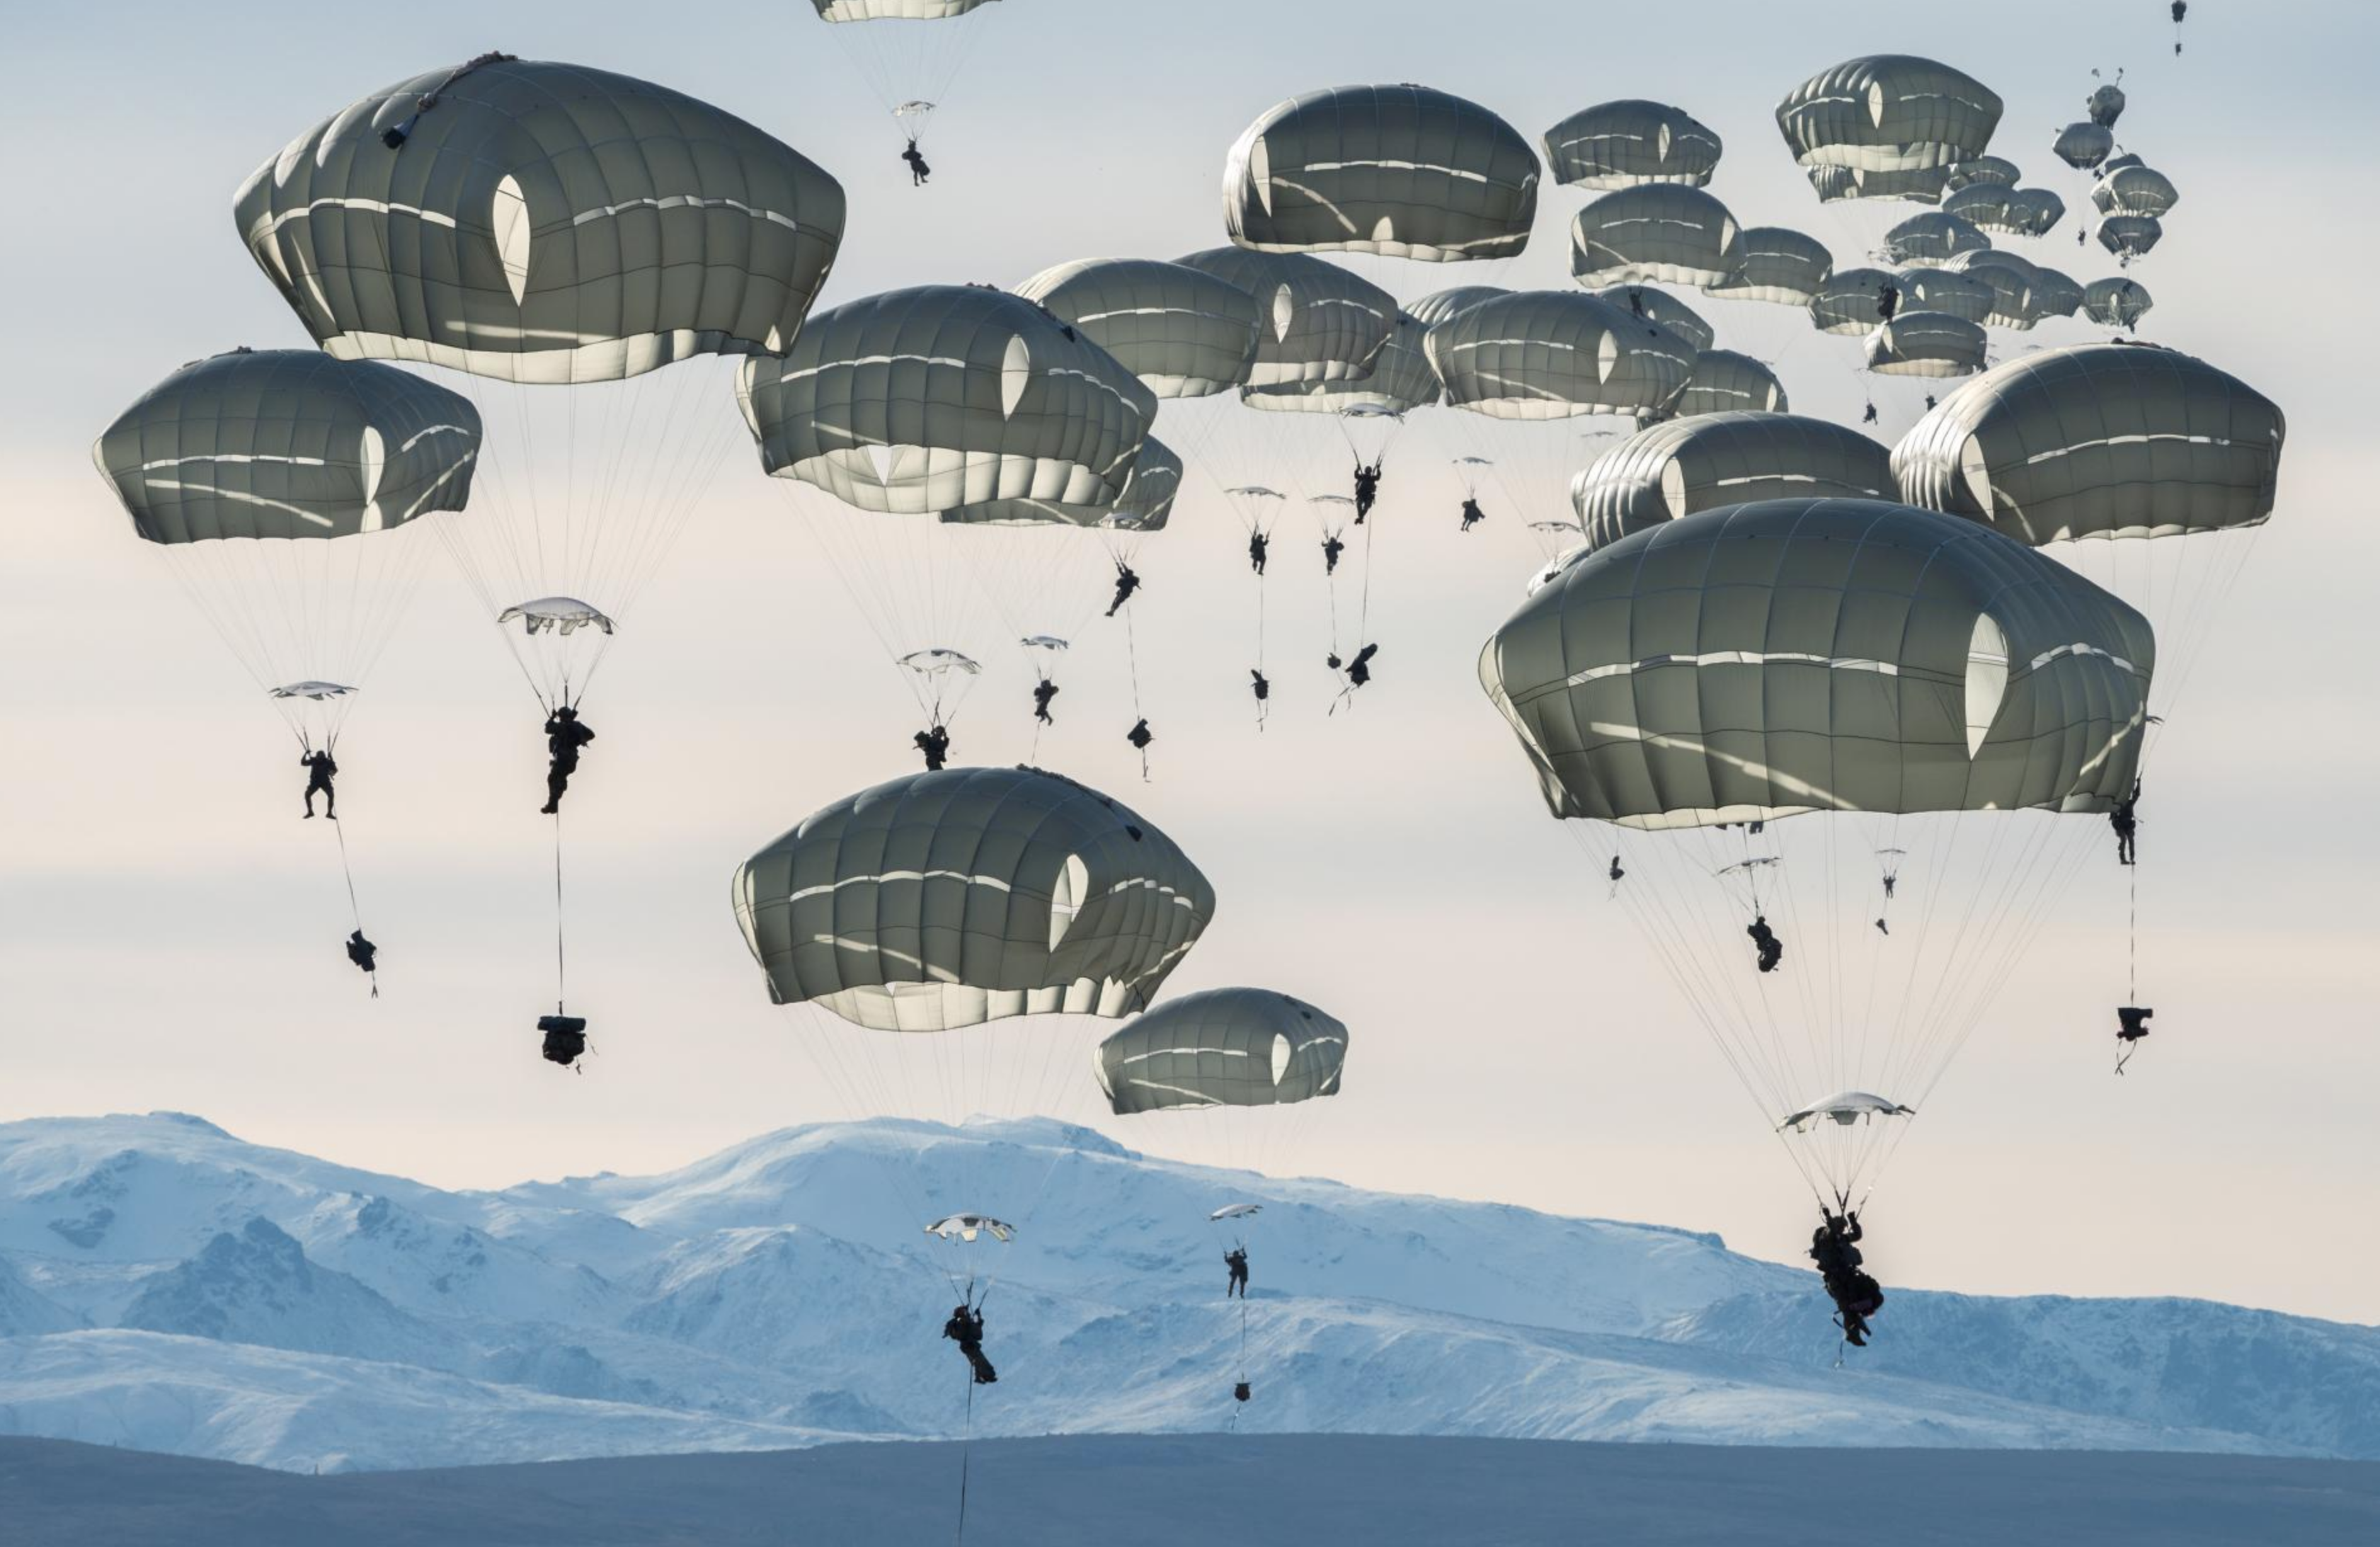 Some 400 U.S. soldiers practice parachute jumps near Alaska’s Fort Greely. The multinational exercise, which includes Canadian forces, prepares troops for the rigors of large, coordinated operations in extreme cold conditions. Image by Louie Palu. United States, 2019.